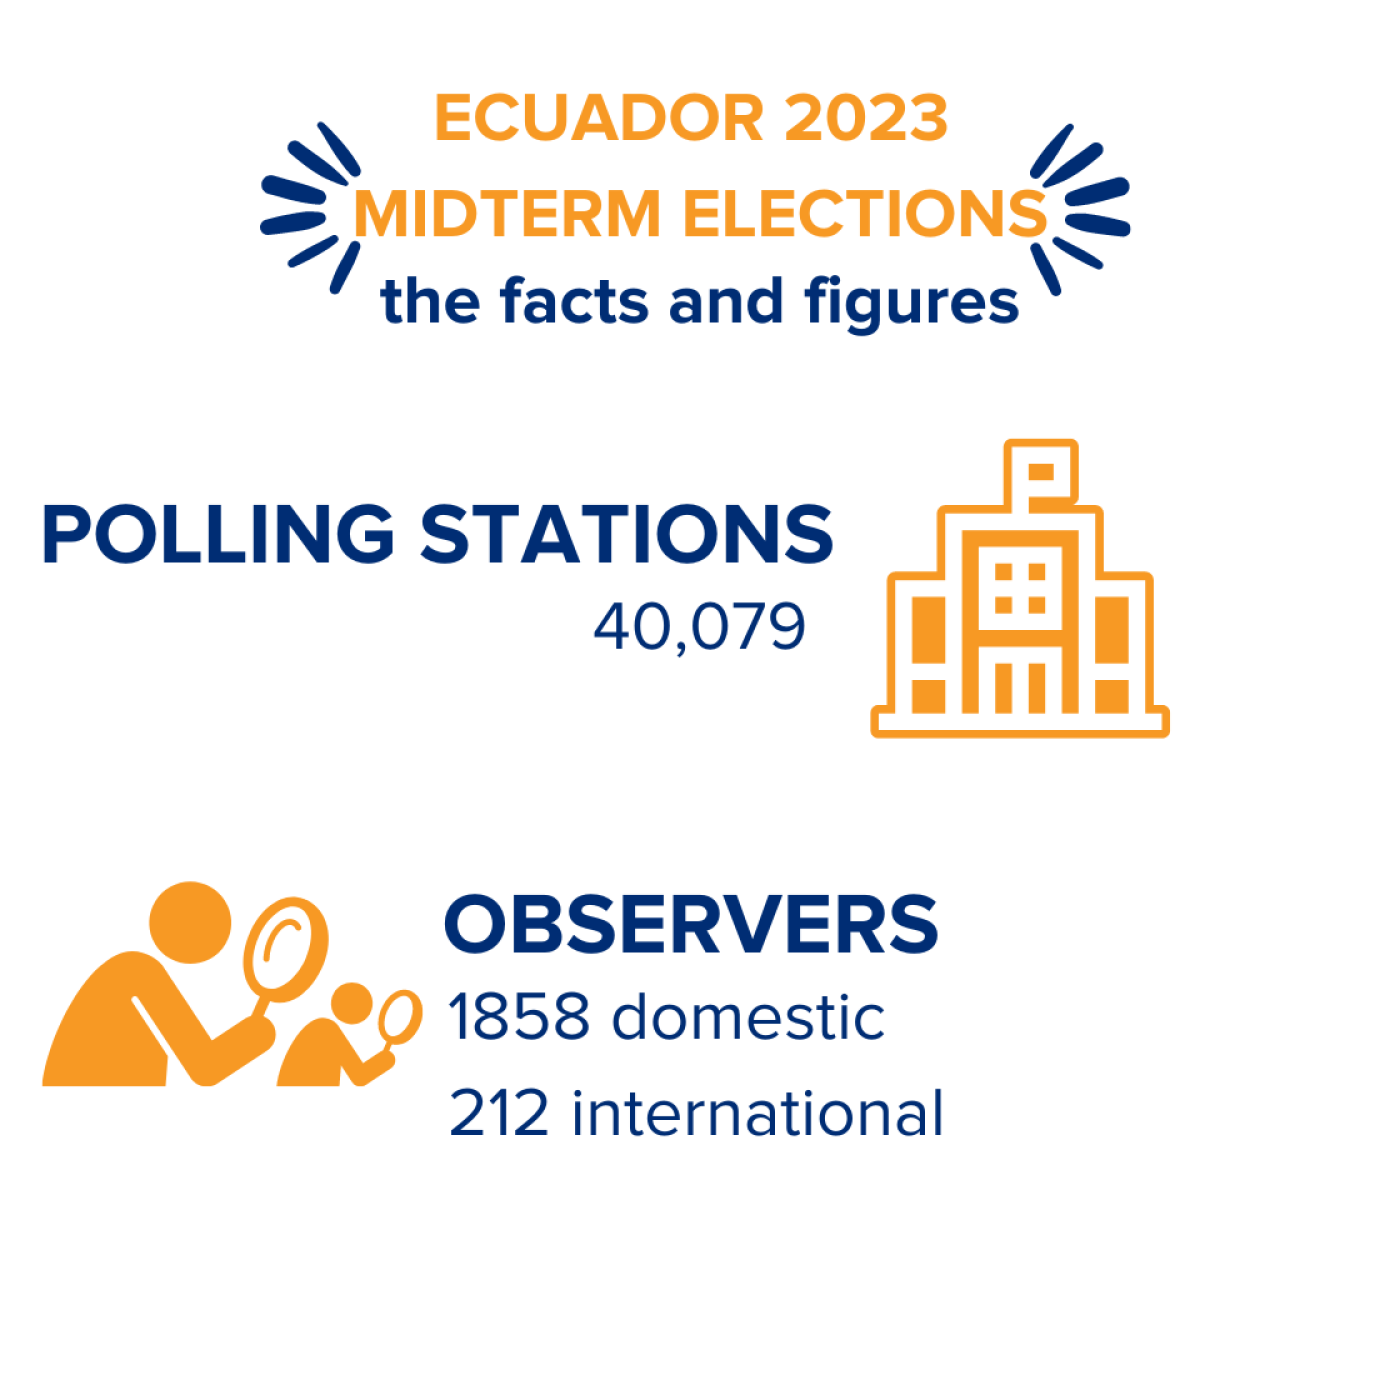 Ecuador 2023 Midterm Elections the facts and figures